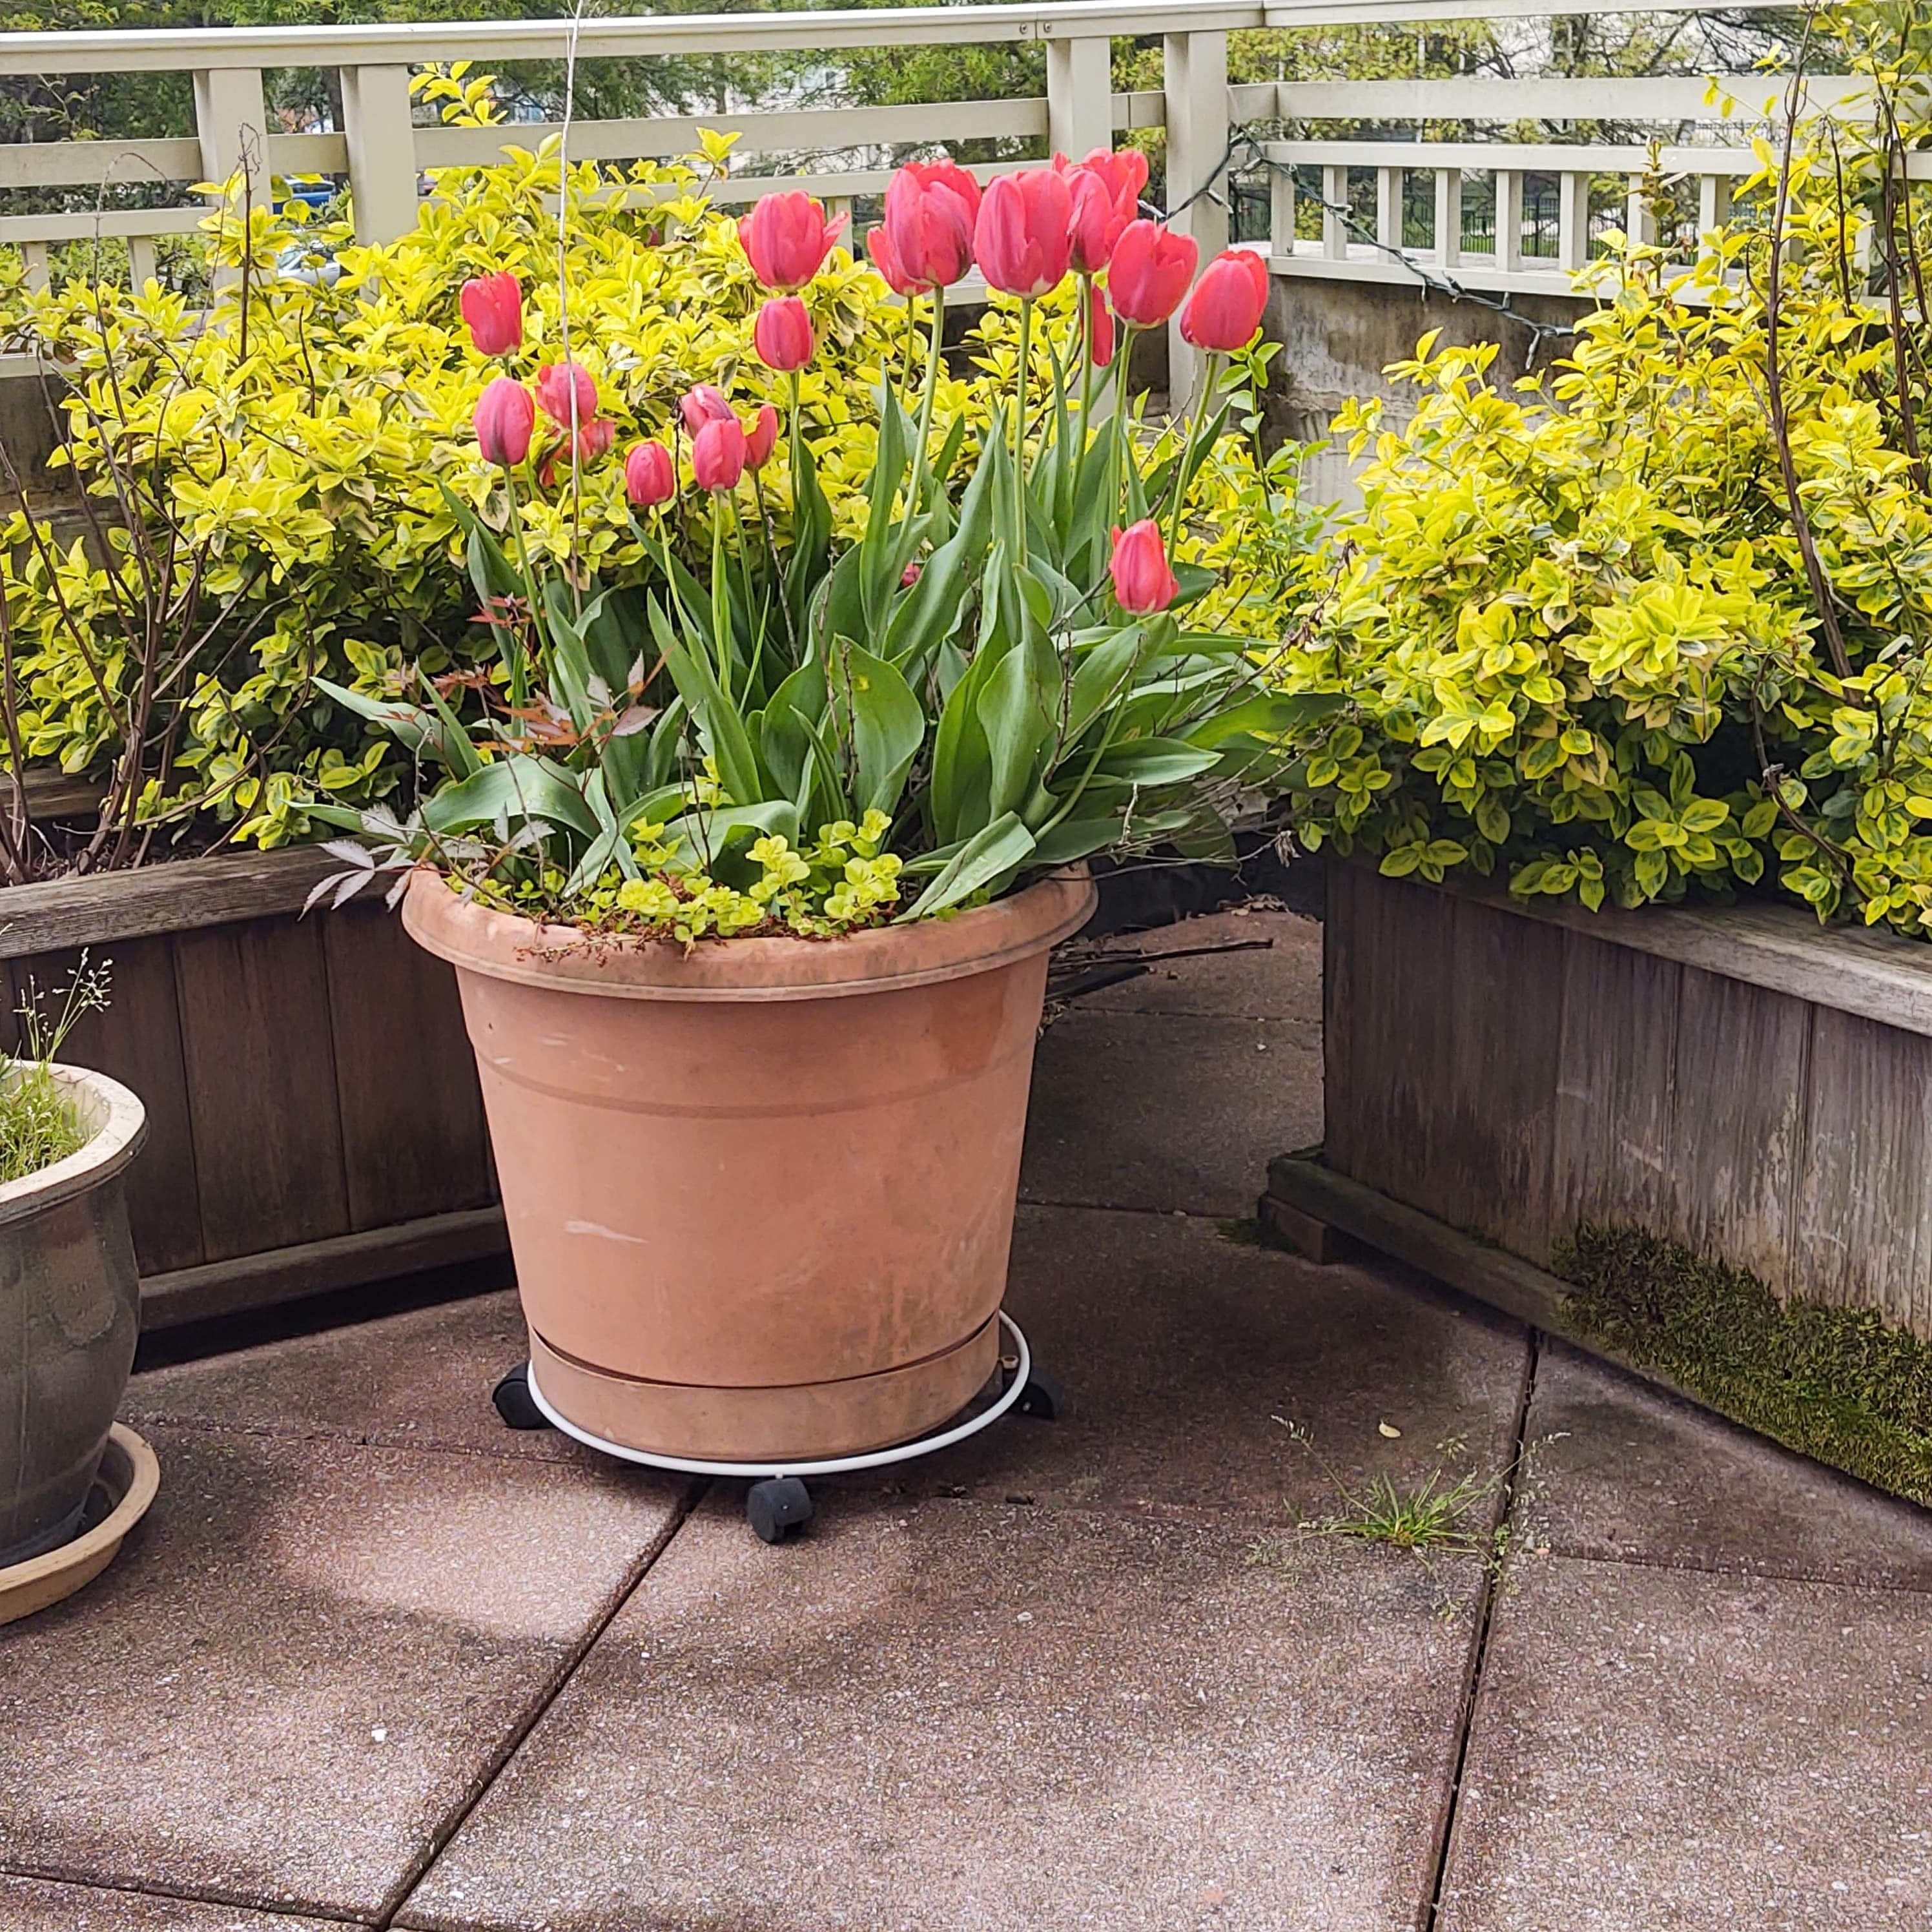 New life on the terrace (tulips and euonymus), 4-21